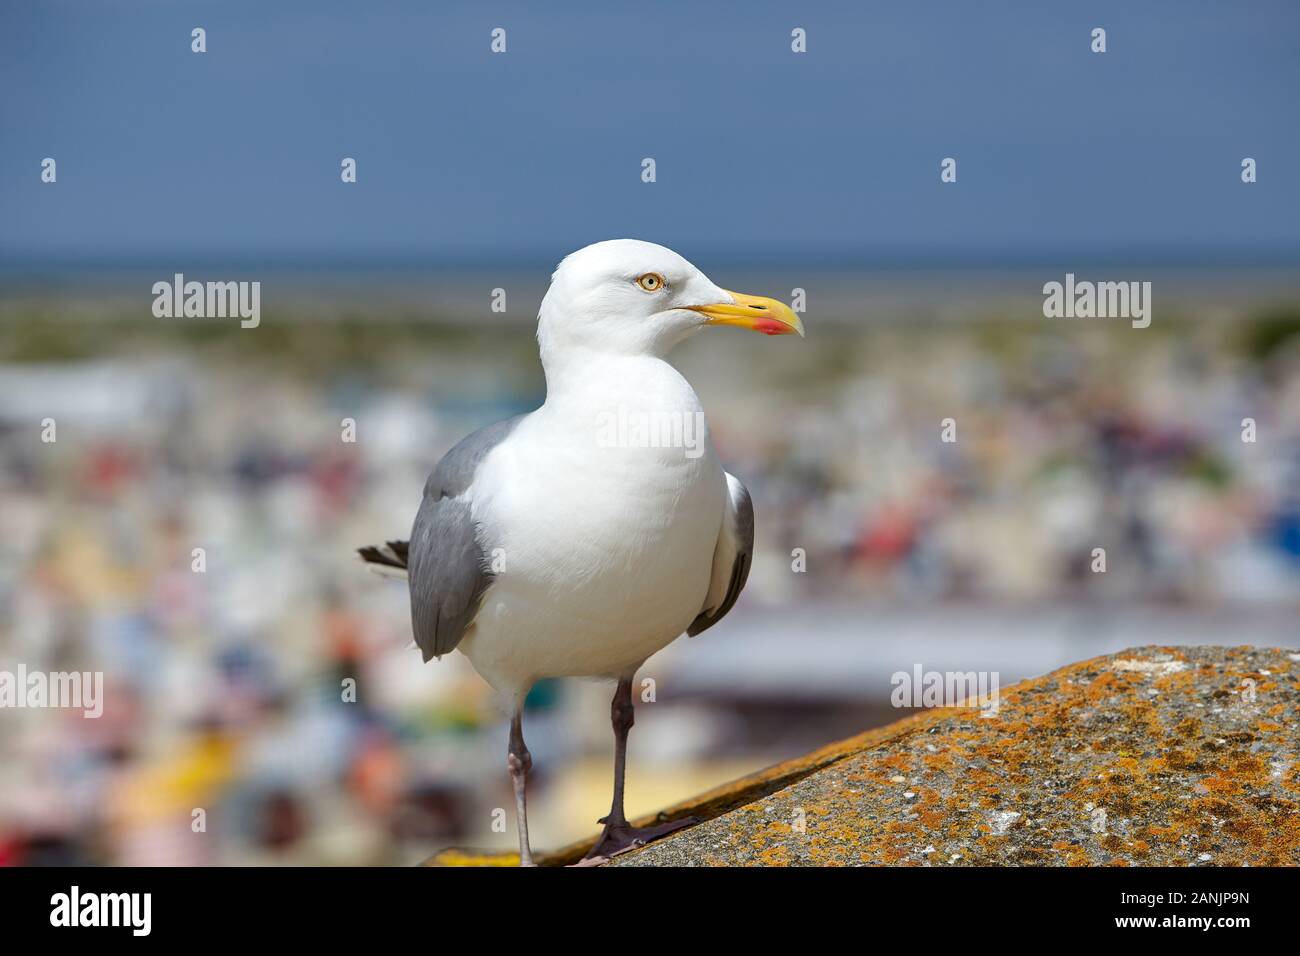 Seagull perched on stone wall at North beach, Borkum Stock Photo